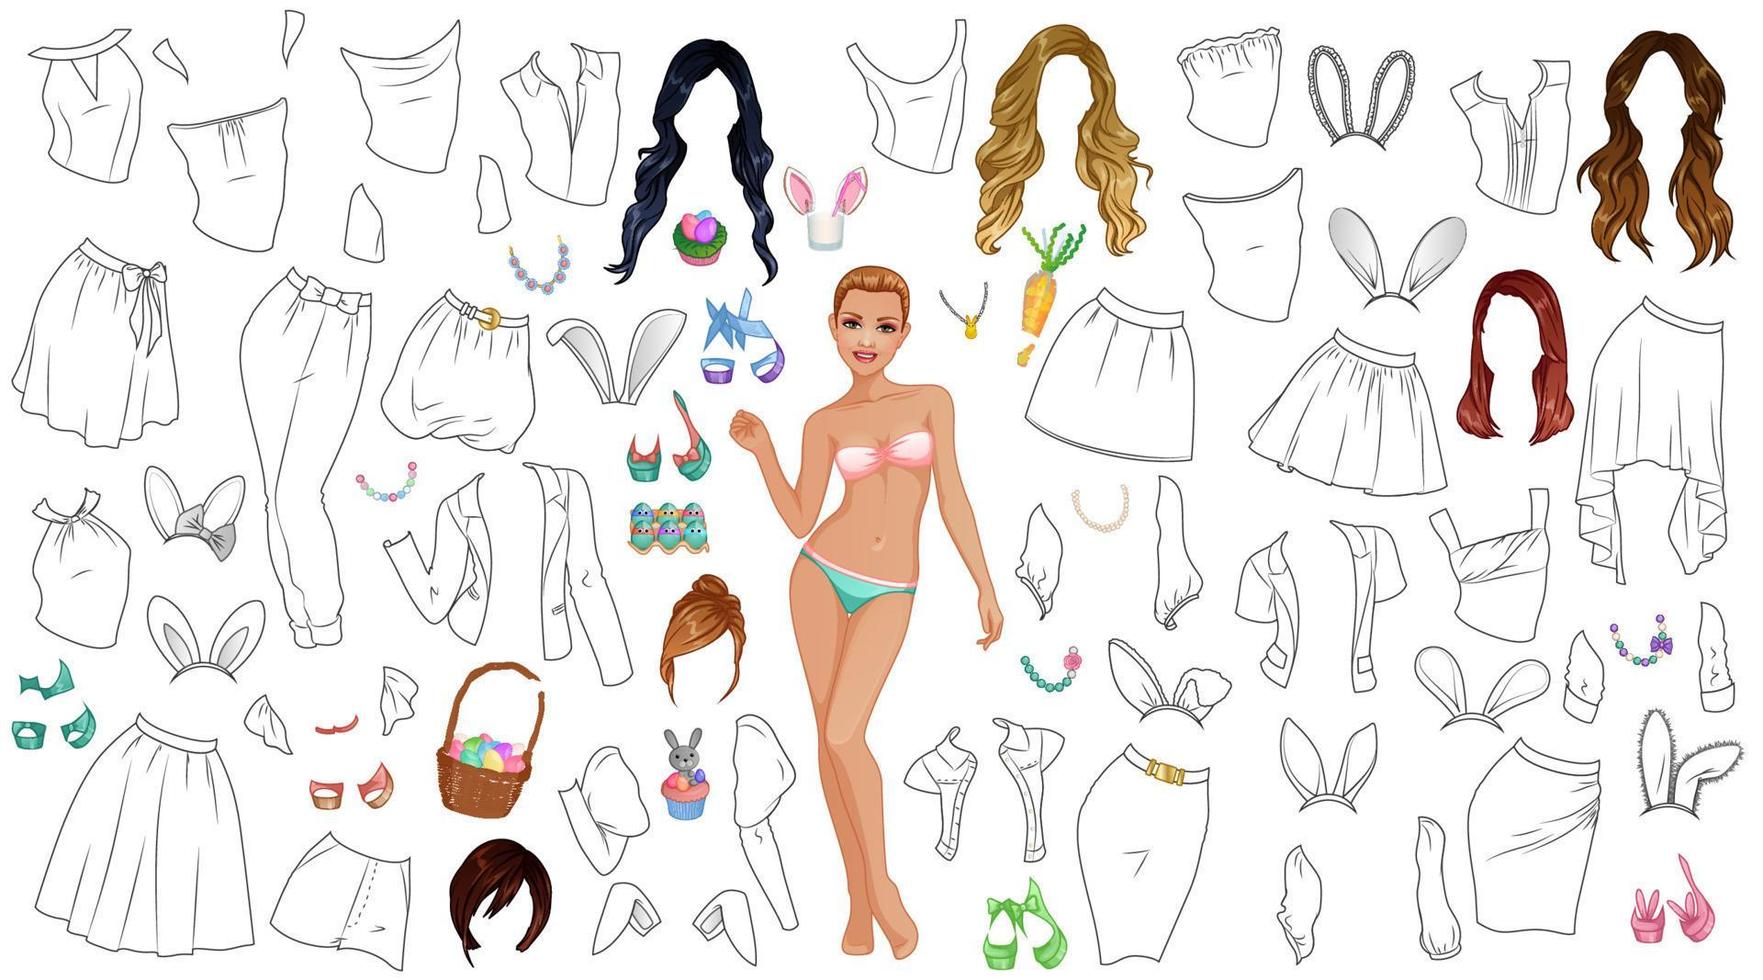 Easter Bunny Coloring Page Paper Doll with Outfits, Hairstyles, Shoes, Accessories and Bunny Ears. Vector Illustration